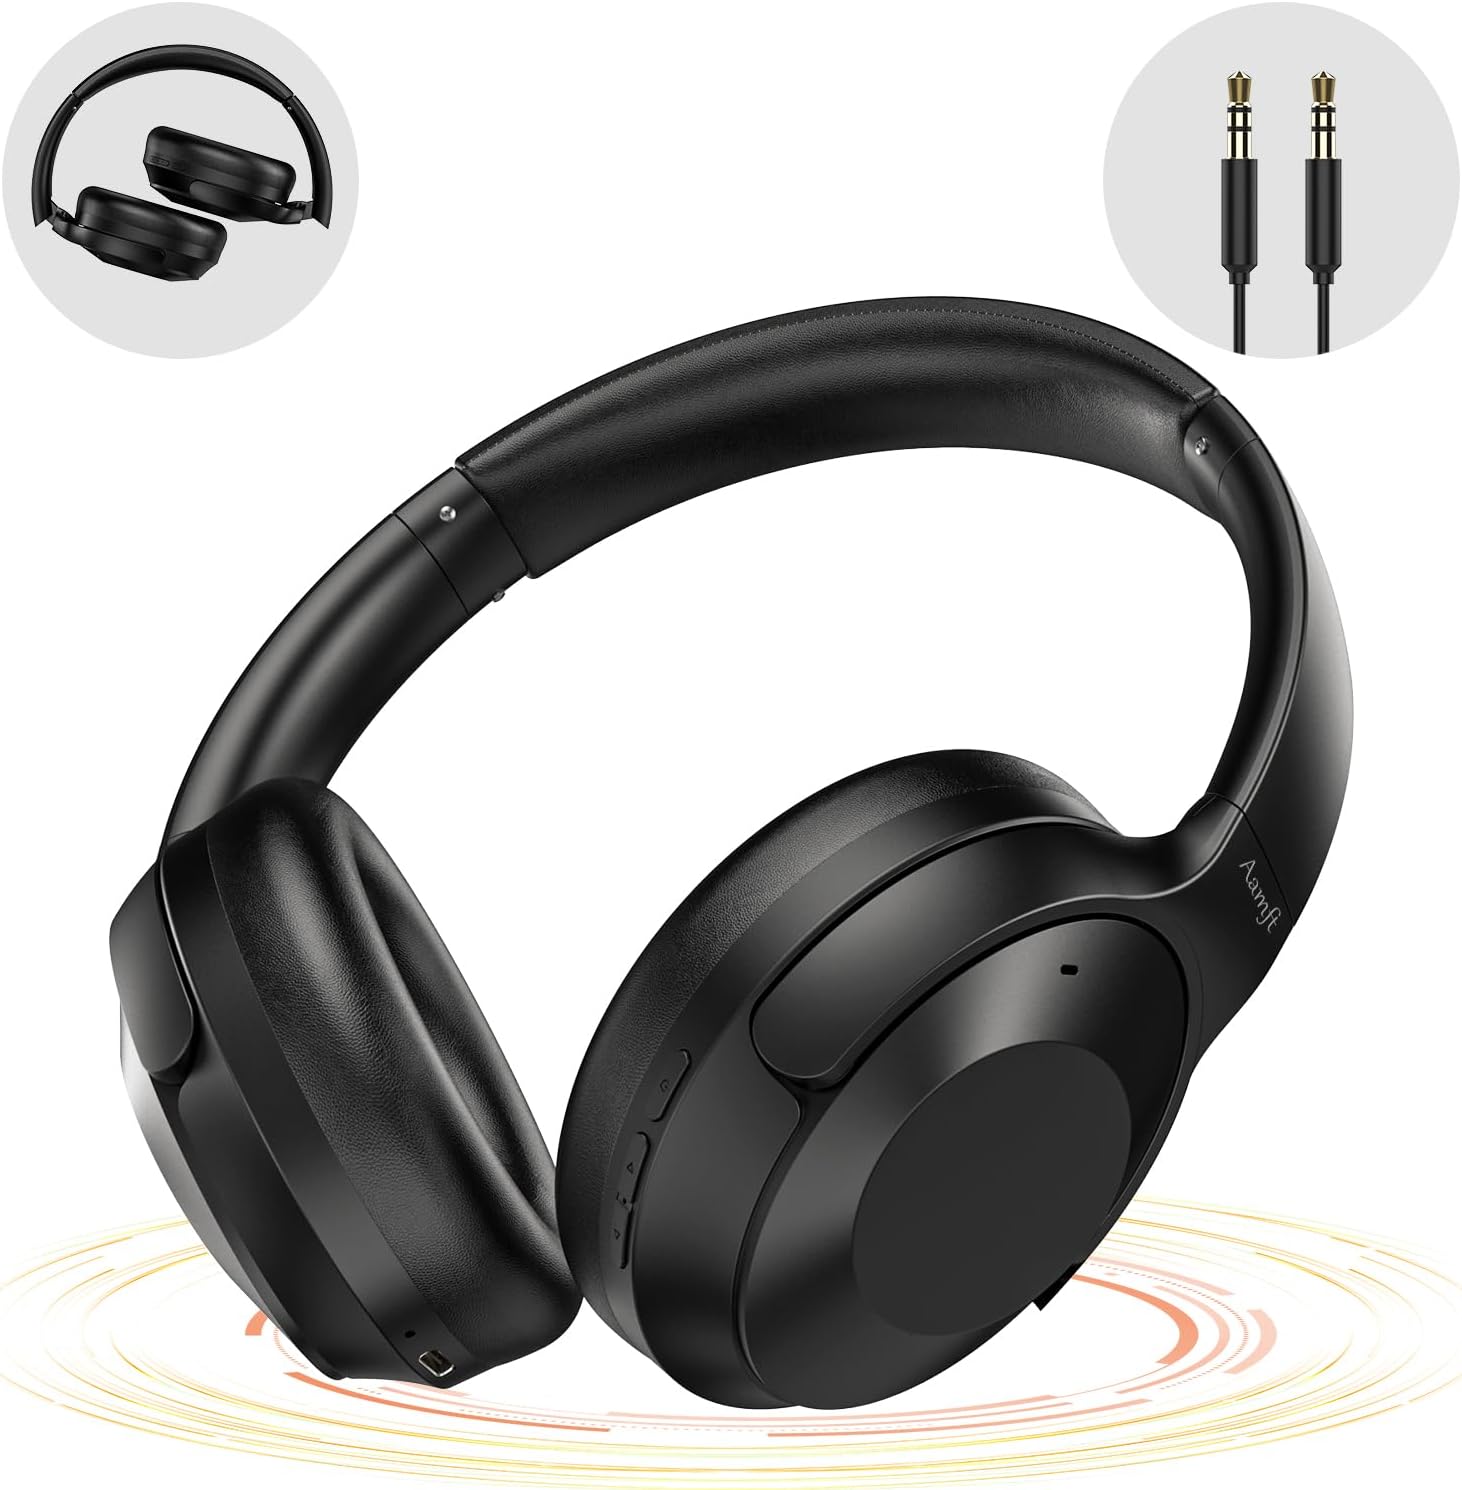 Aamft Over Ear Headphones - Superior Sound Quality, Active Noise Cancelling, Bluetooth 5.3 Modern Design Headphones with Mic, Enhanced Comfort for Home Office, Gaming